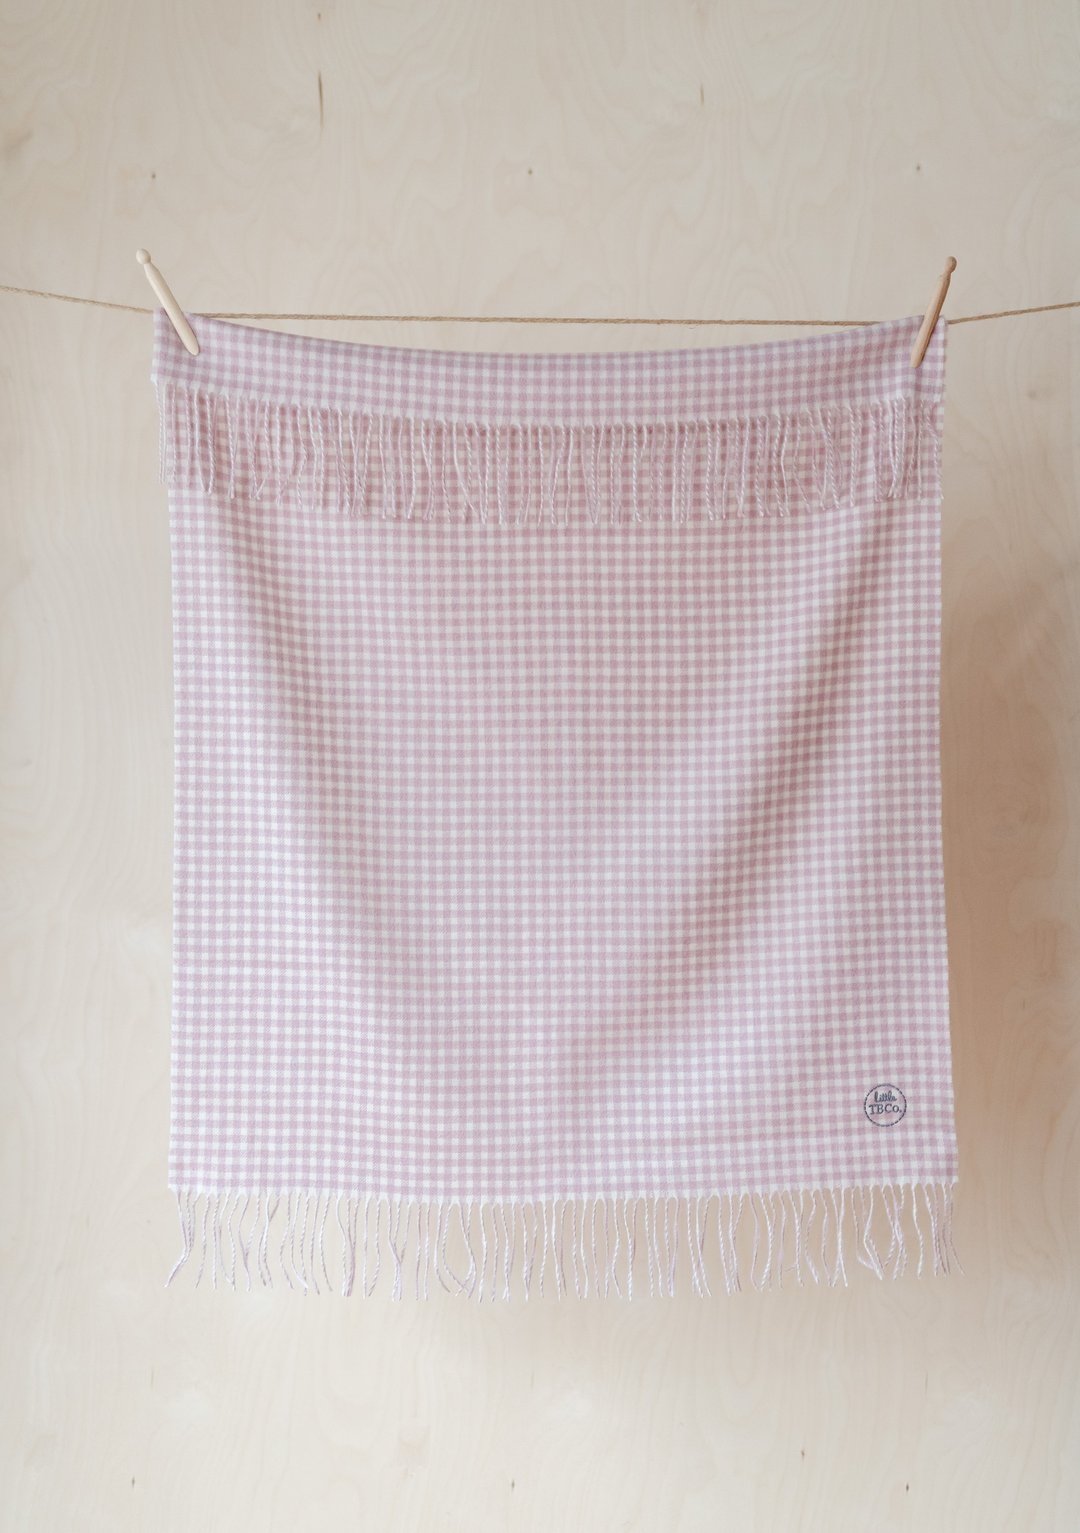 Super Soft Lambswool Baby Blanket in Dusky Pink Gingham